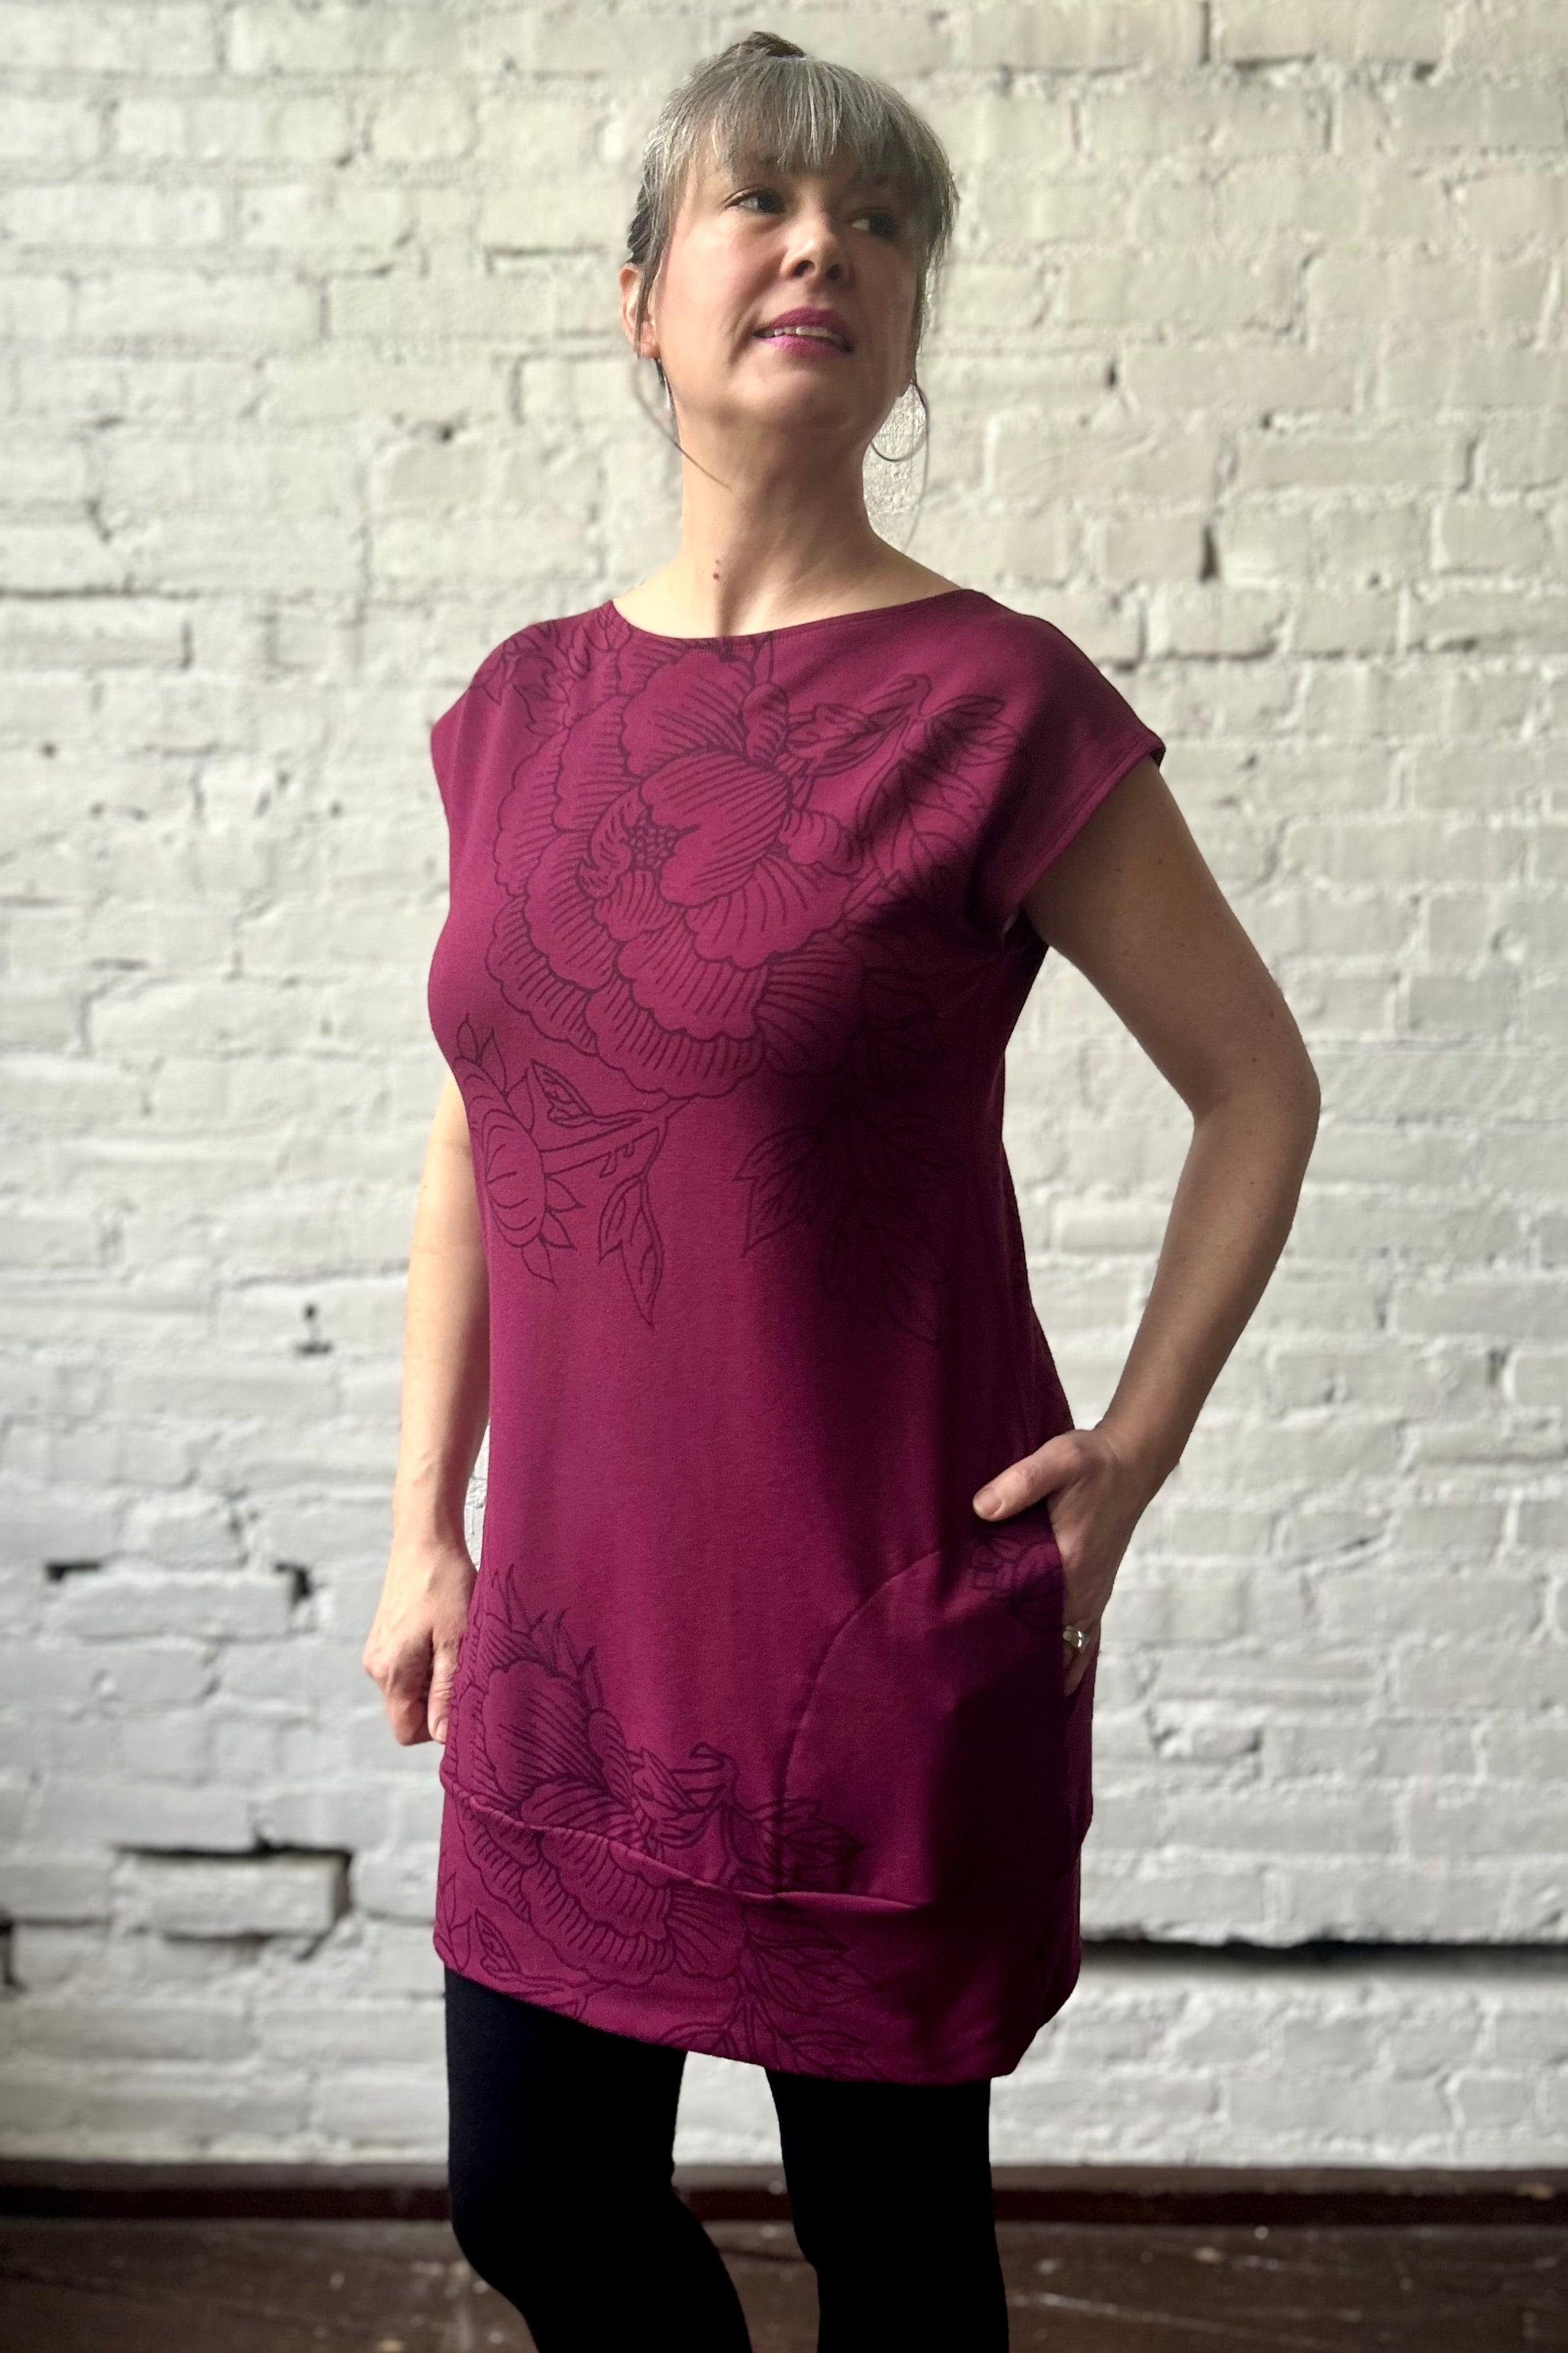 Woman wears a wine-coloured cap-sleeved tunic with giant peony outlines printed on it a large repeat pattern. Worn with black leggings